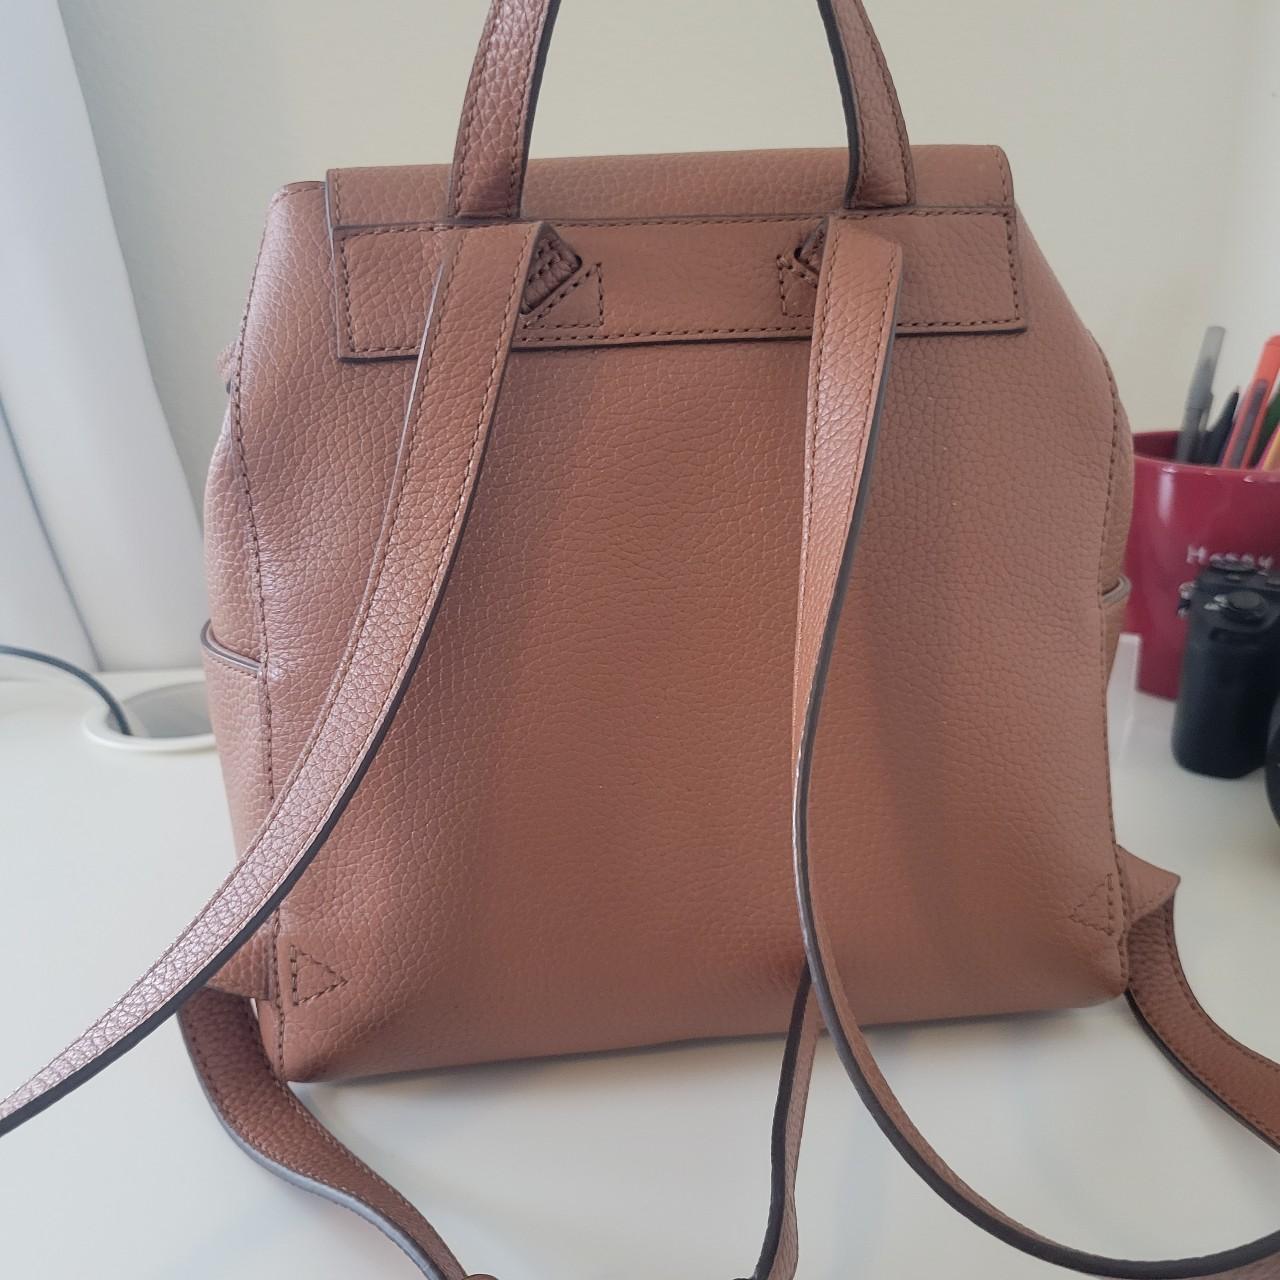 Tory Burch Thea Mini backpack. Great for work or - Depop